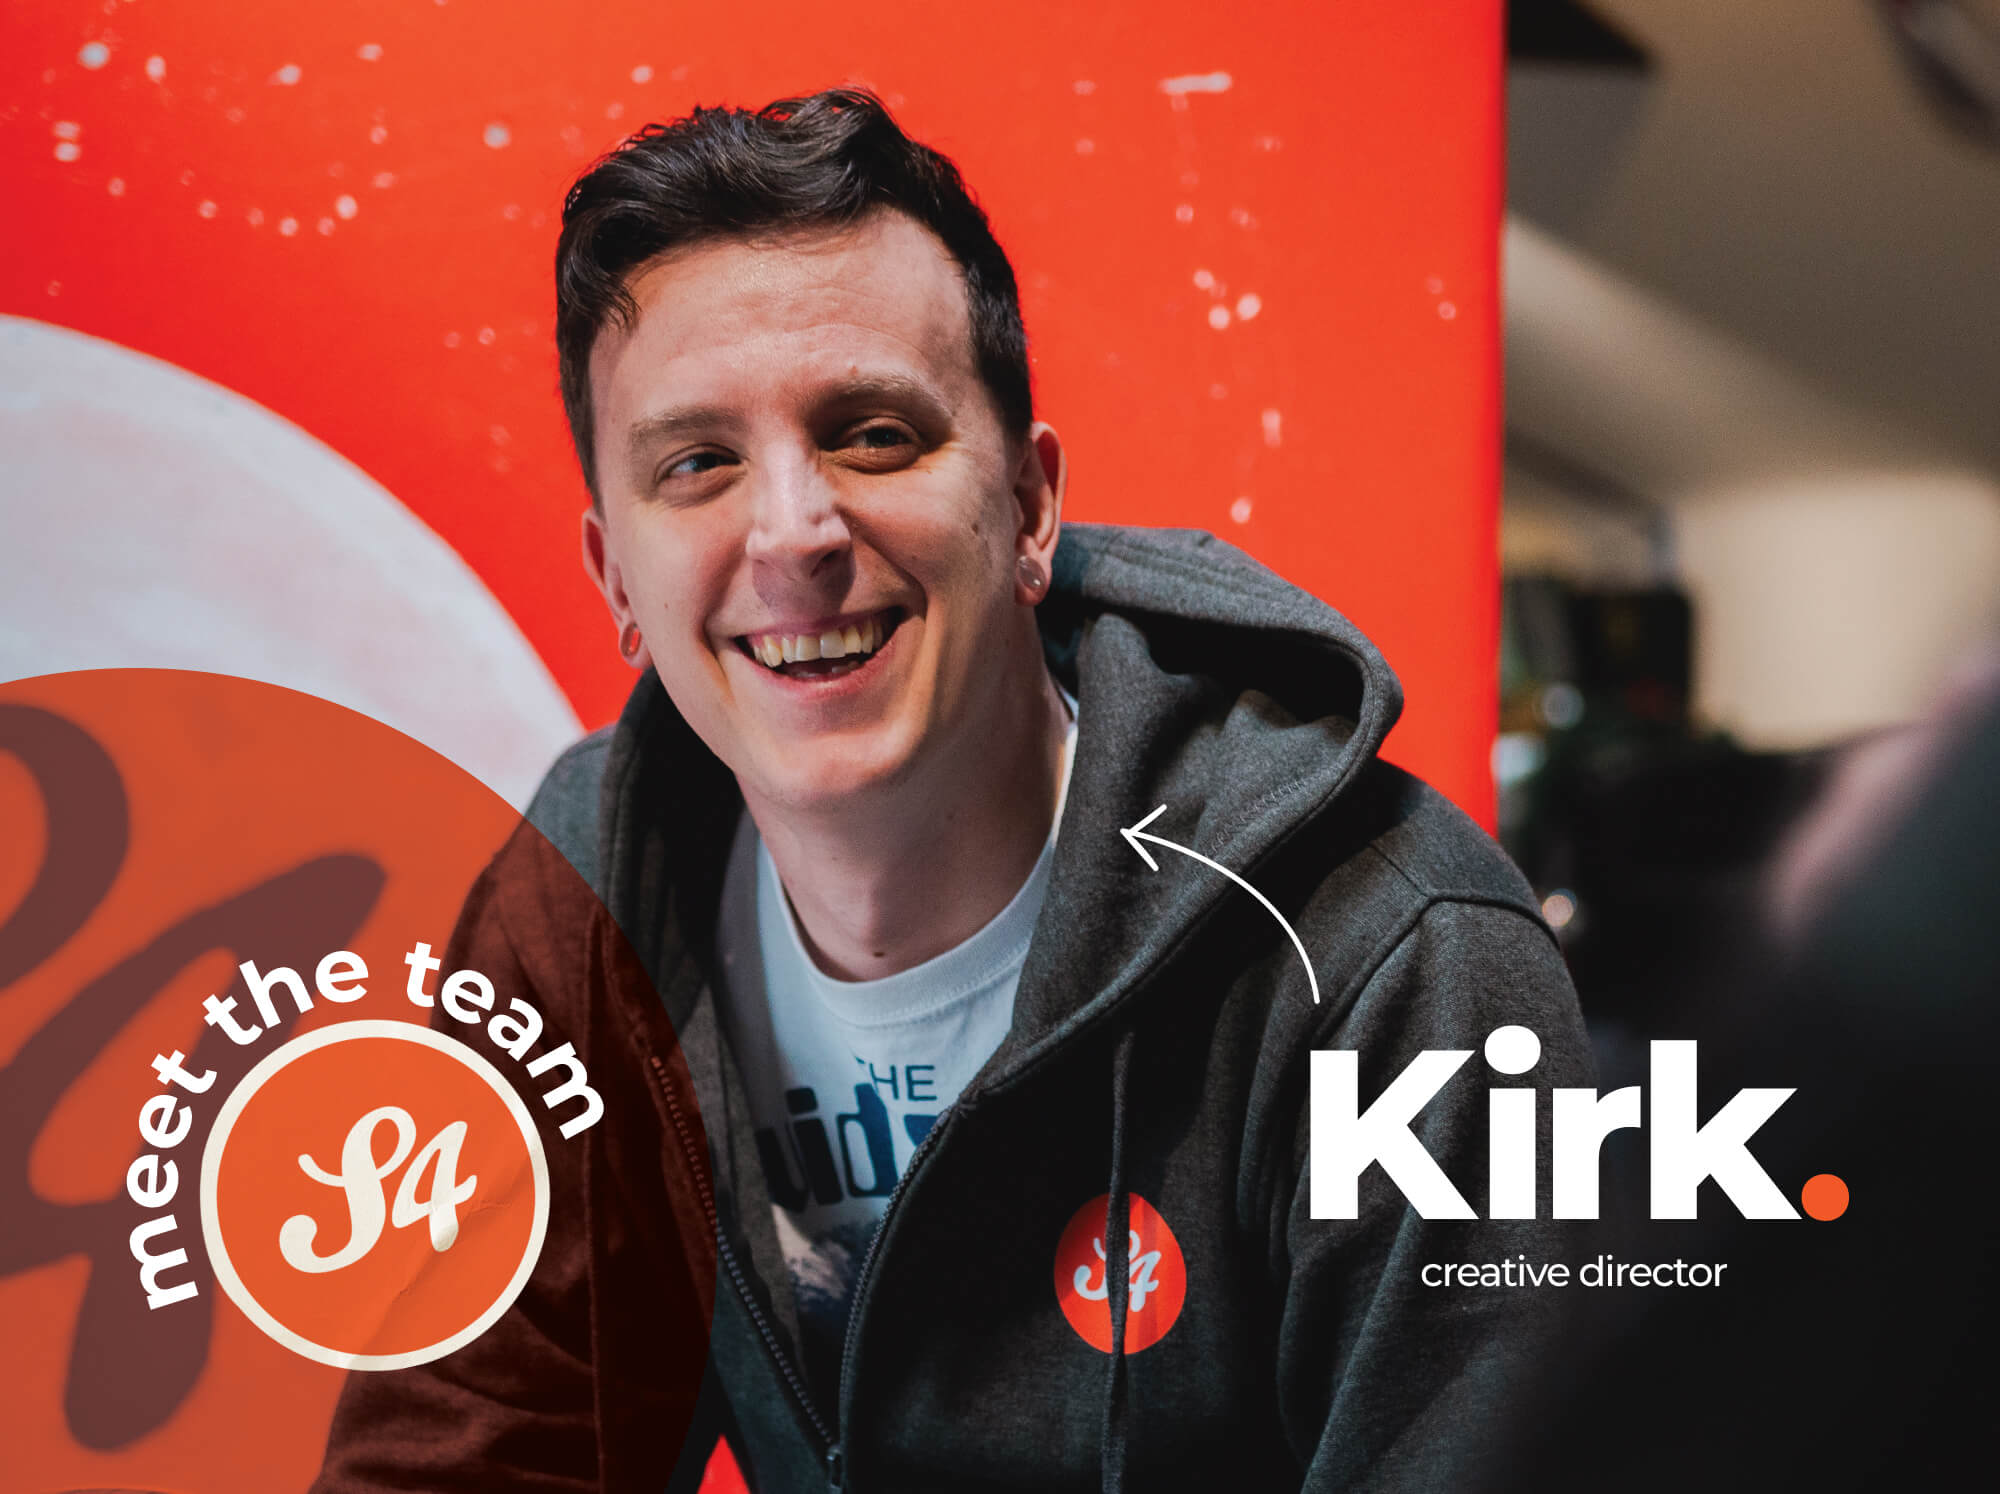 Meet the S4 Team - Sourcefour Creative Director Kirk laughing in the studio on an orange backdrop.